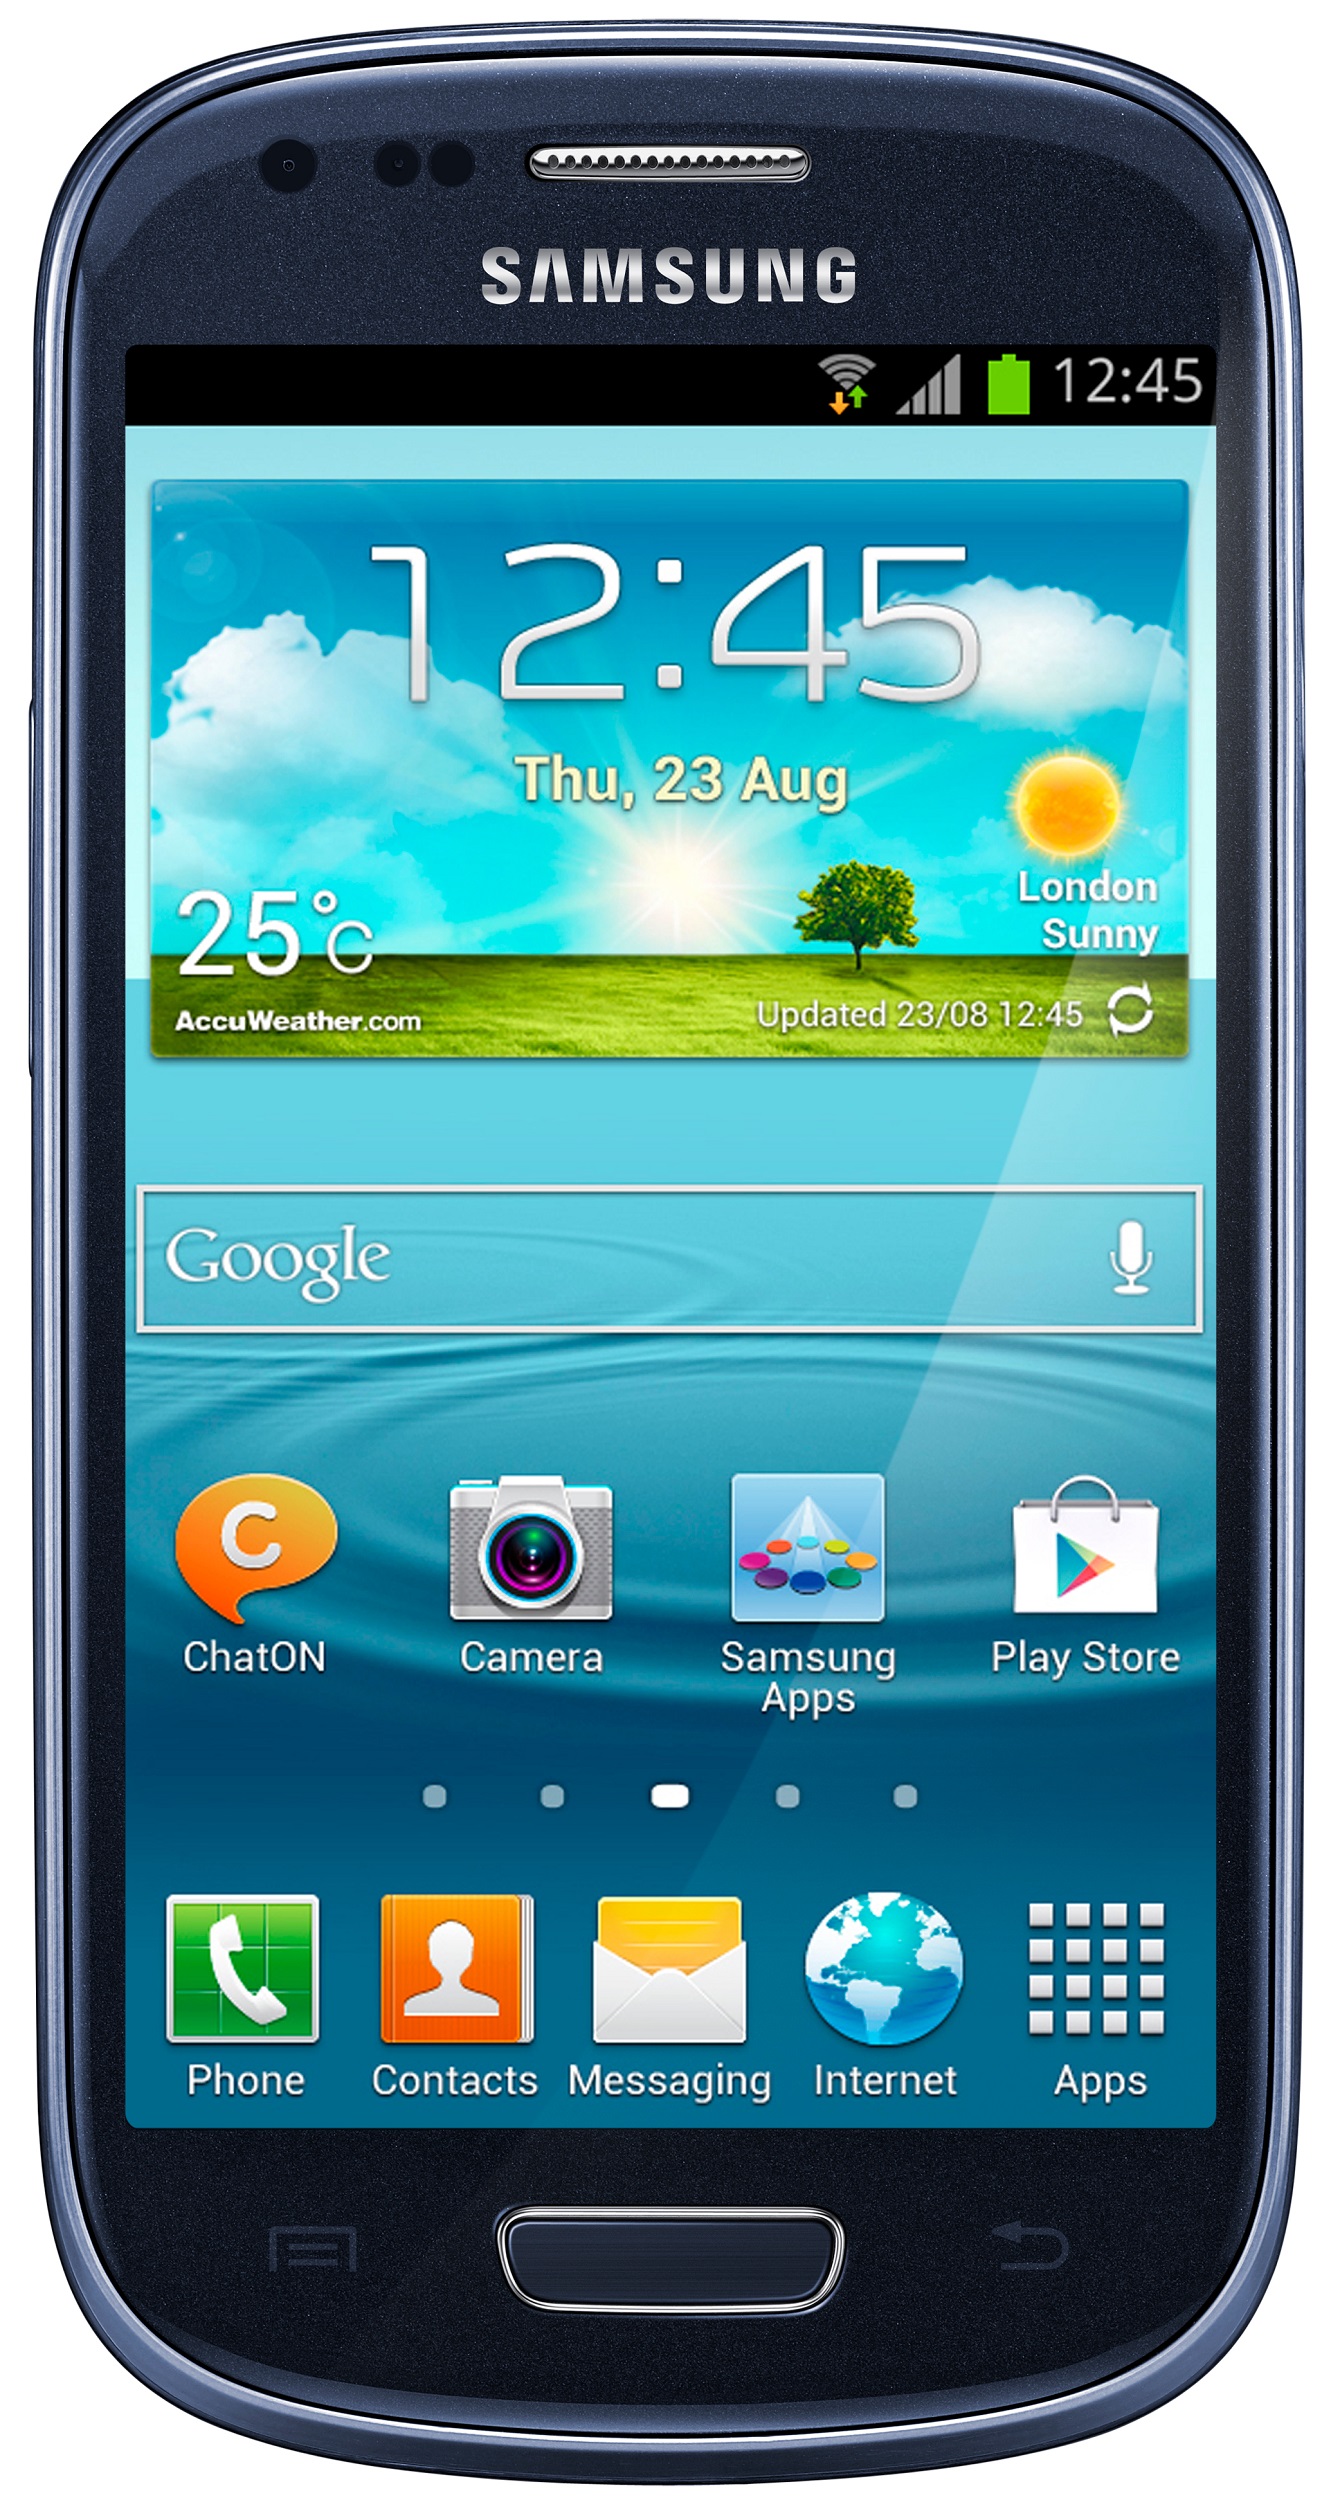 Samsung Galaxy S3 Mini 8GB I8190 Unlocked GSM Android Cell Phone Blue